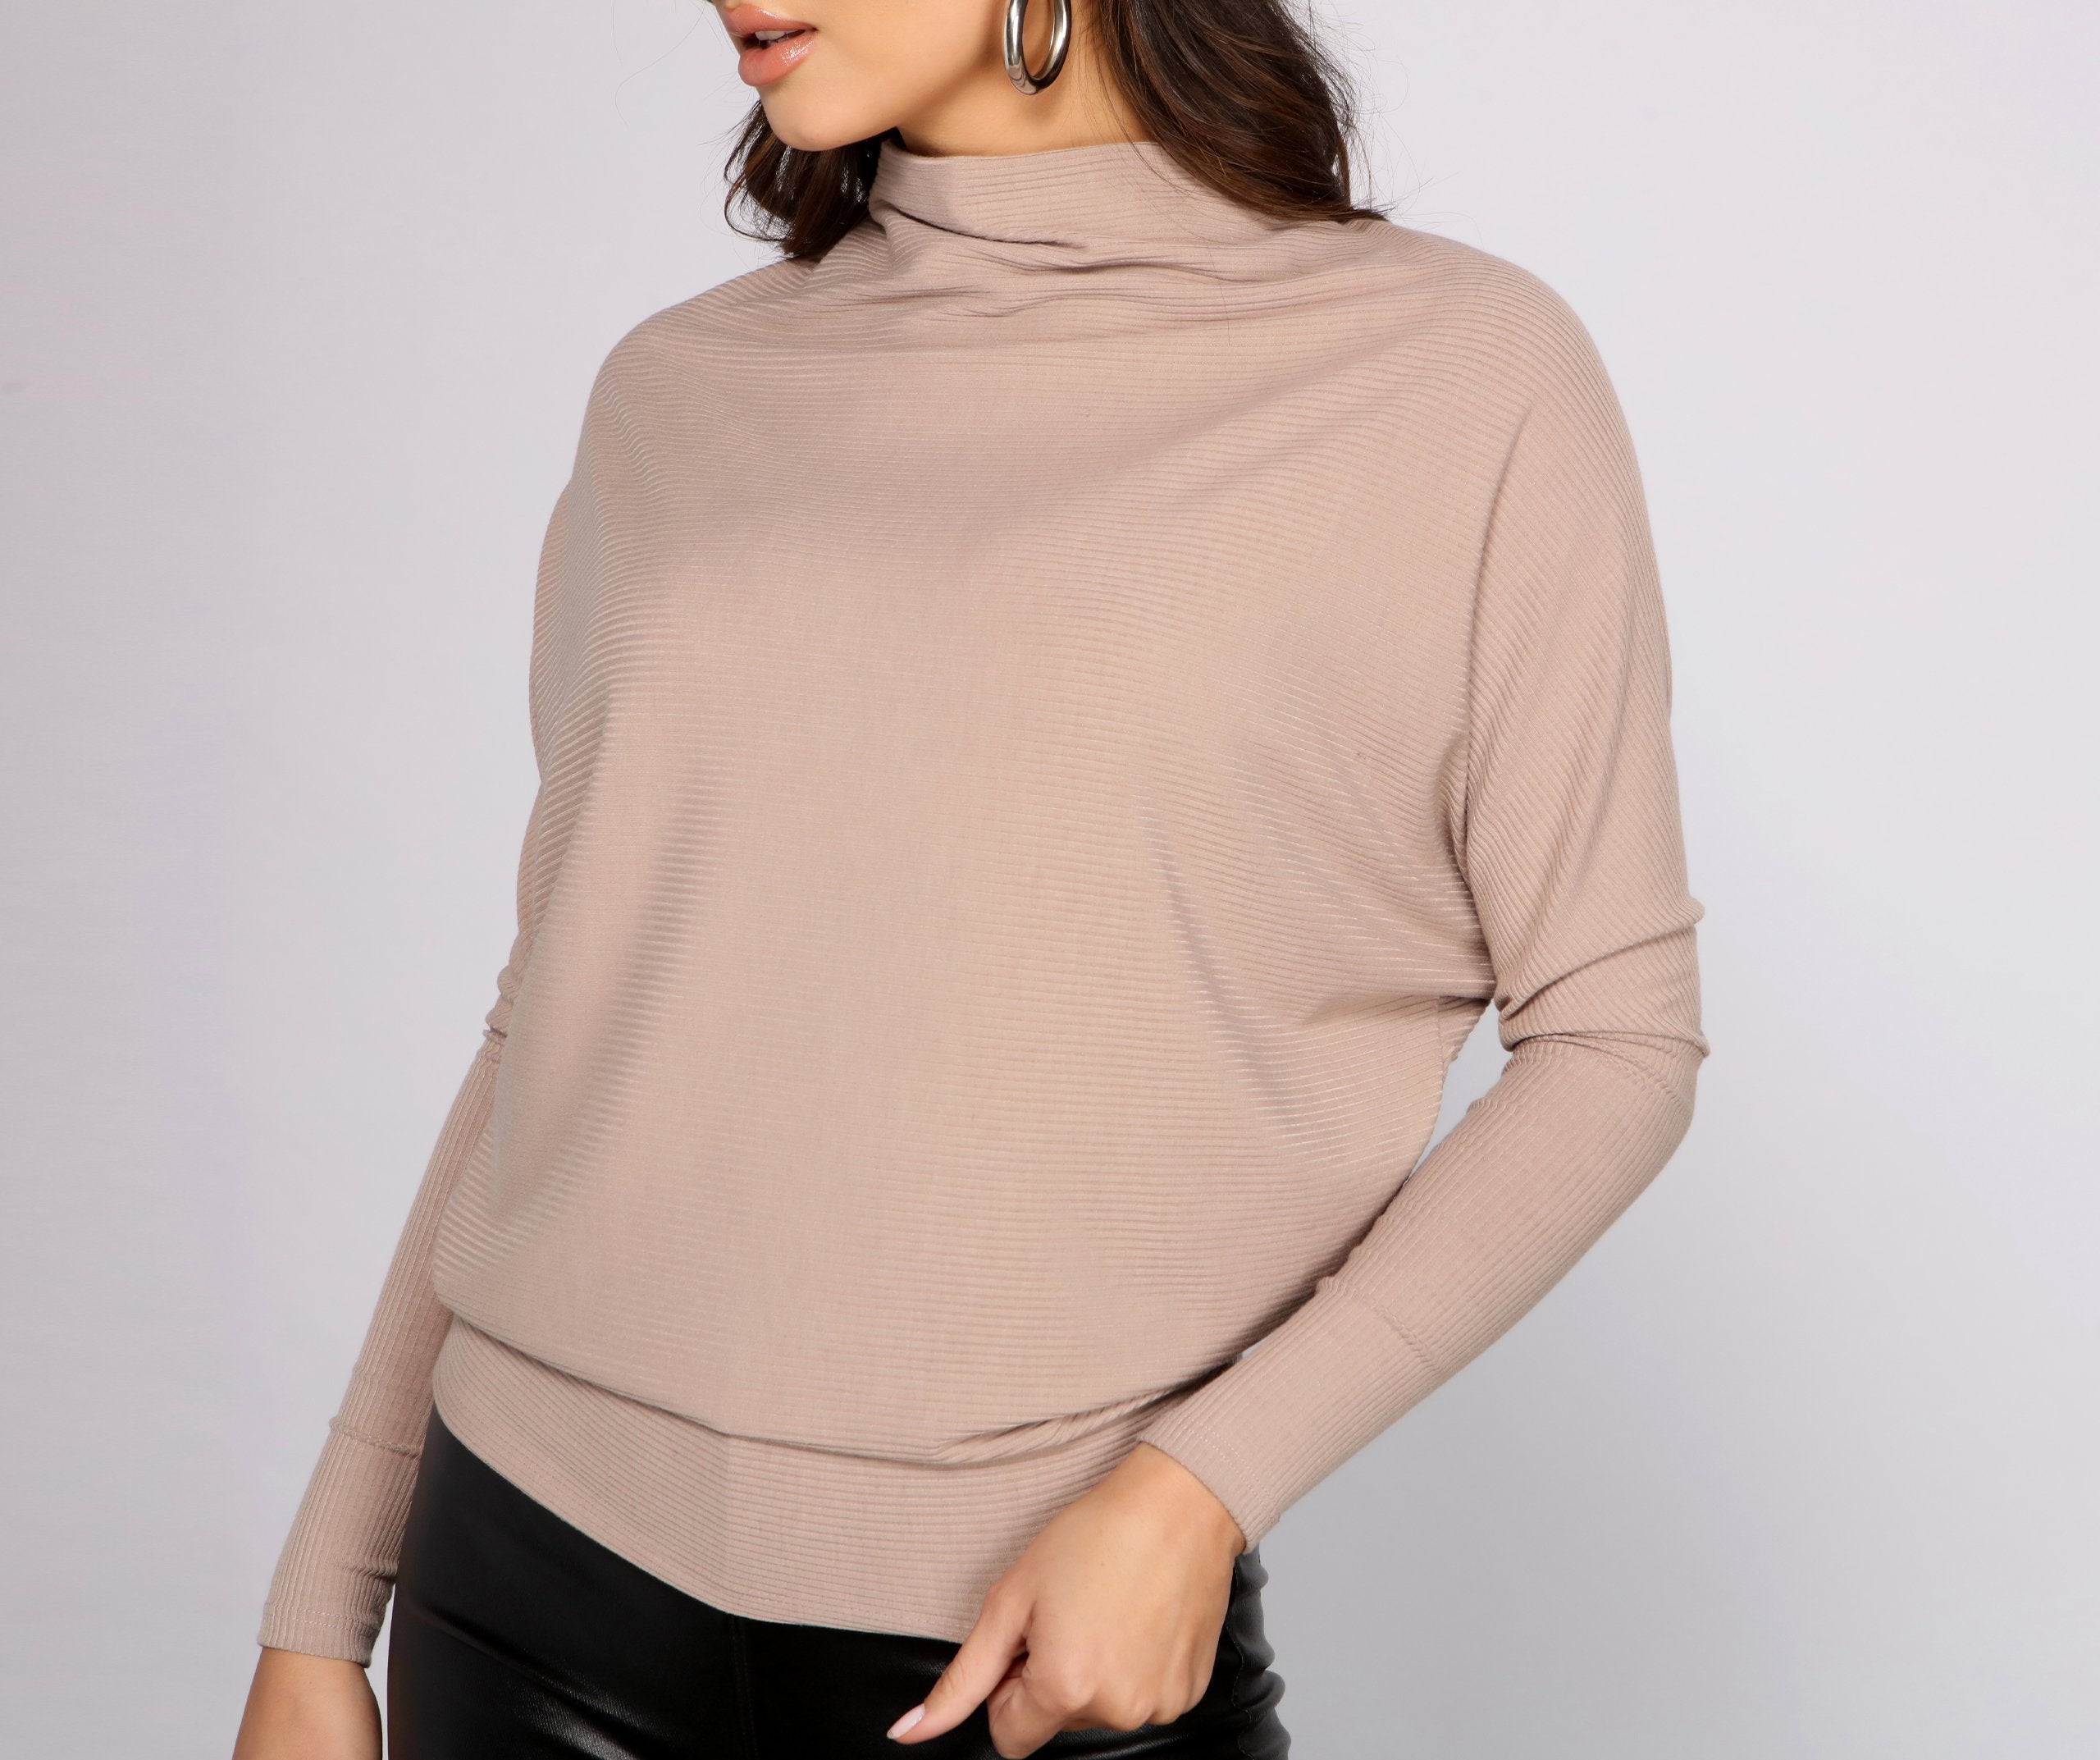 Cozy-Chic Turtleneck Top - Lady Occasions